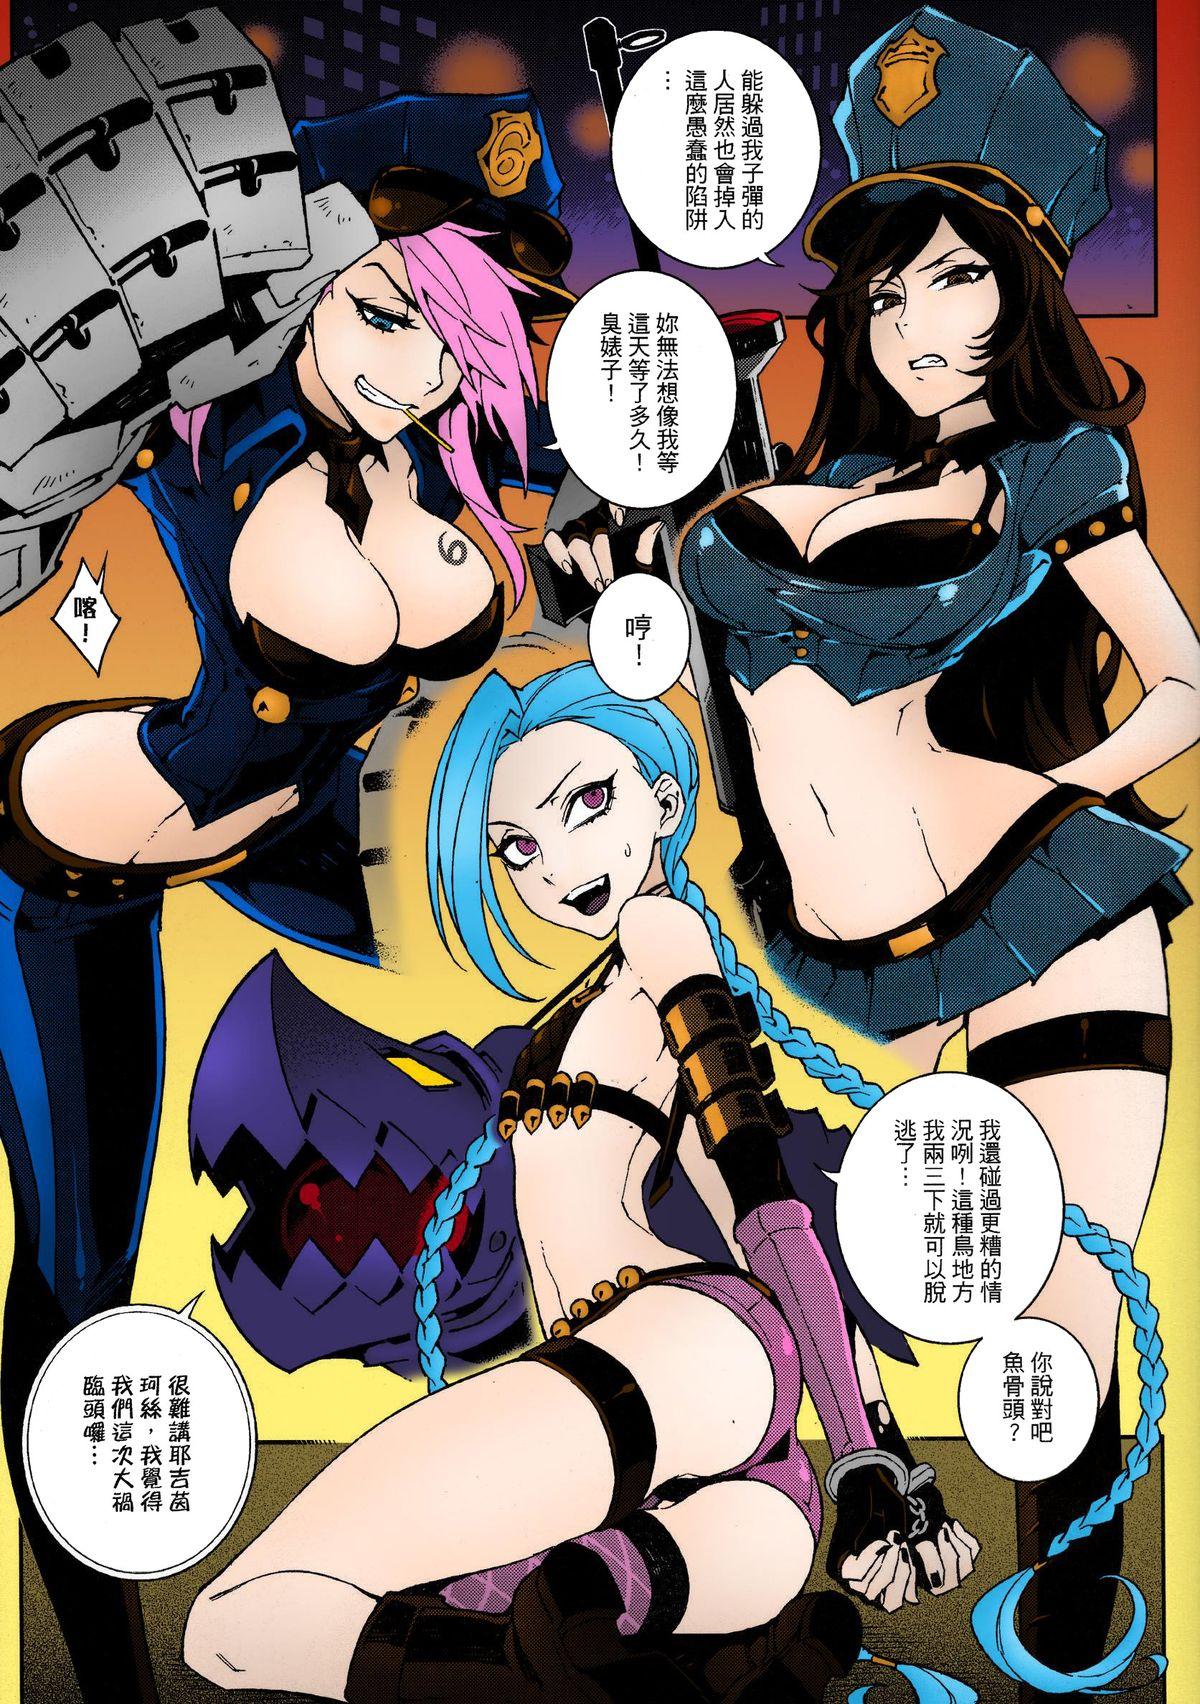 Hot Naked Women JINX Come On! Shoot Faster - League of legends Amigo - Page 4